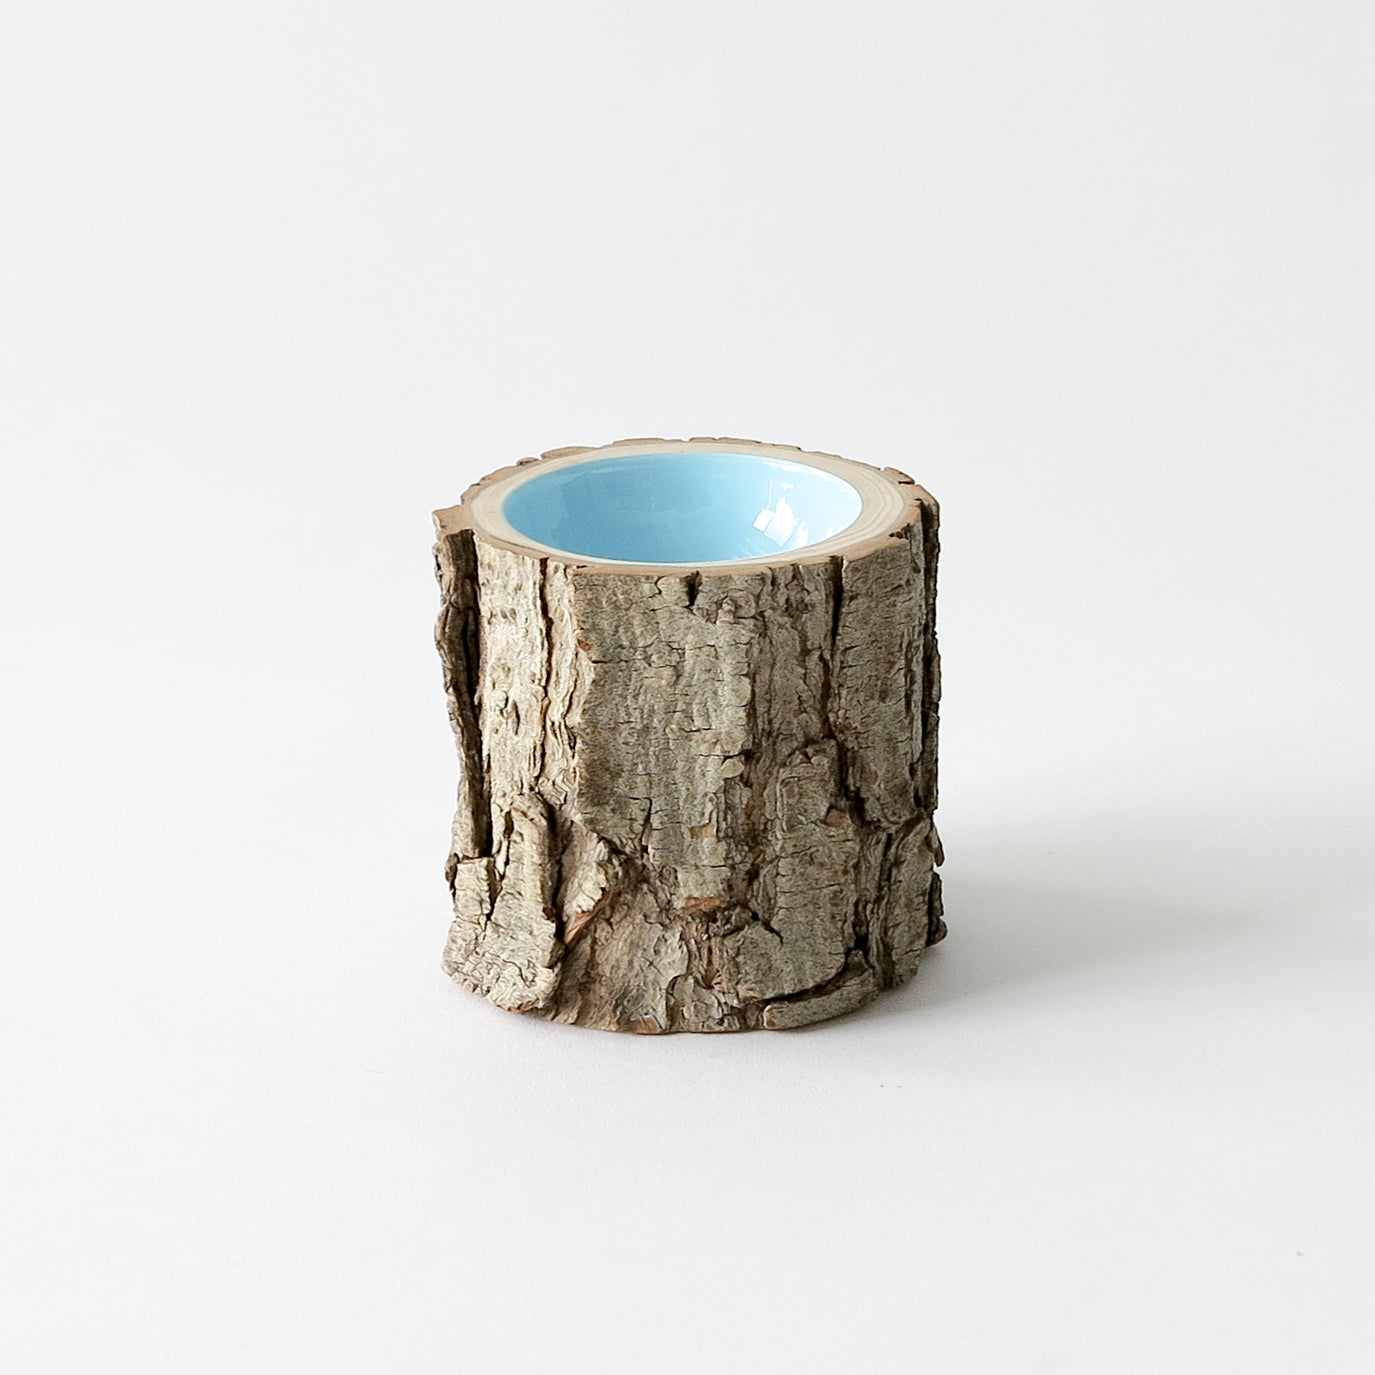 close up view of Size 3 Log Bowl - small wooden bowl with rough bark, glossy interior is a sky blue colour.